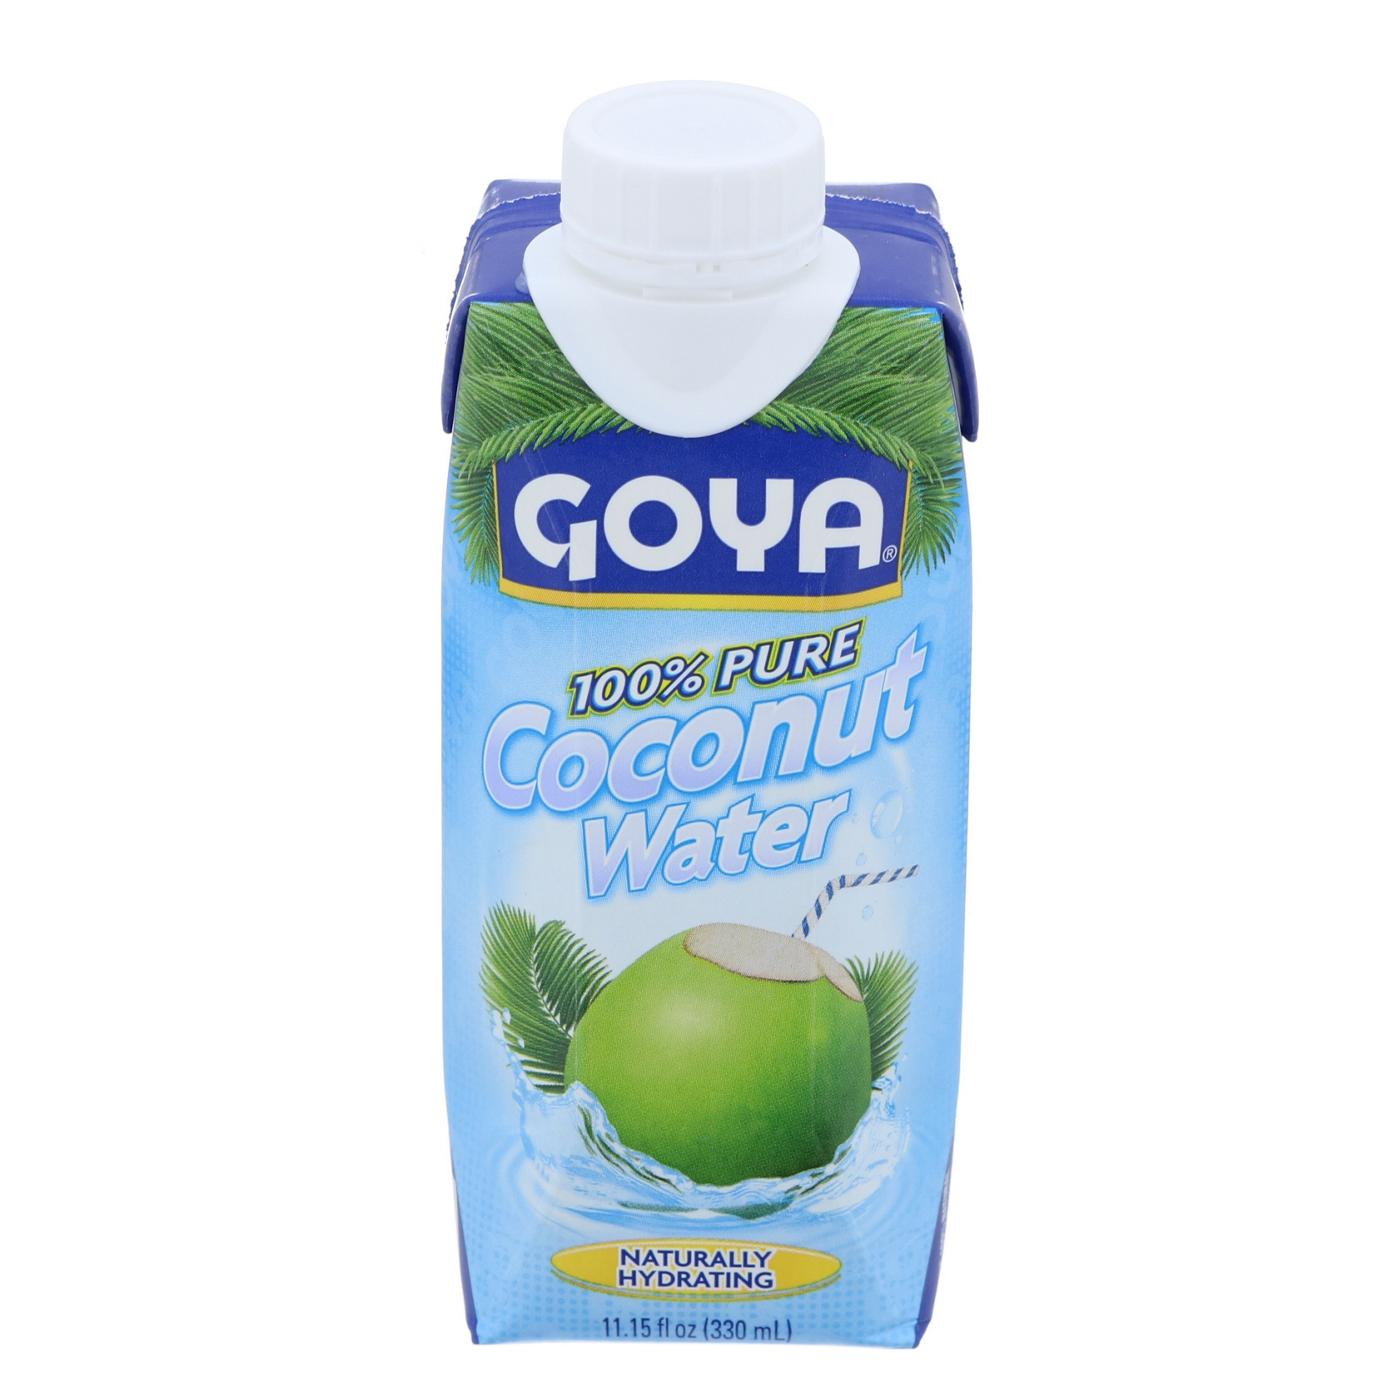 Goya 100% Pure Coconut Water; image 1 of 2